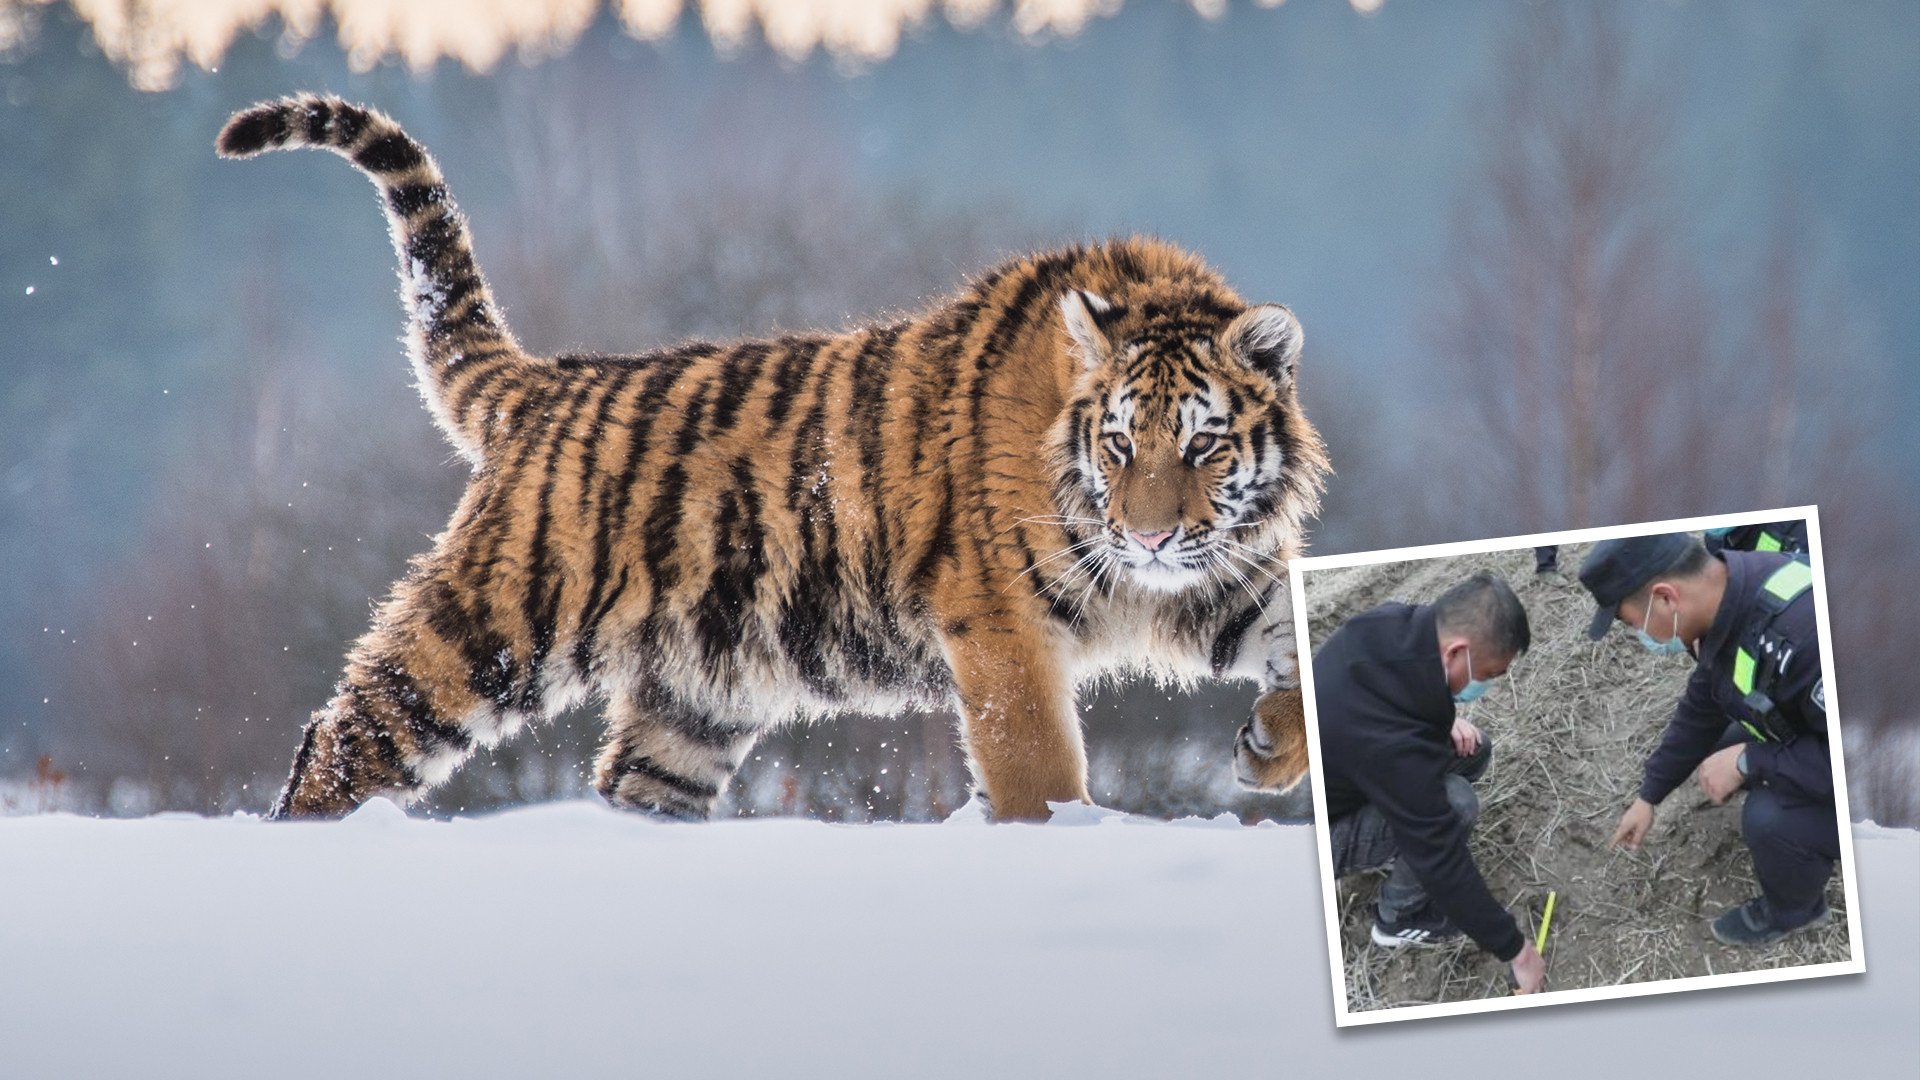 Siberian tigers discovered in northeast China raised hopes that the population is on the rebound. Photo: SCMP composite